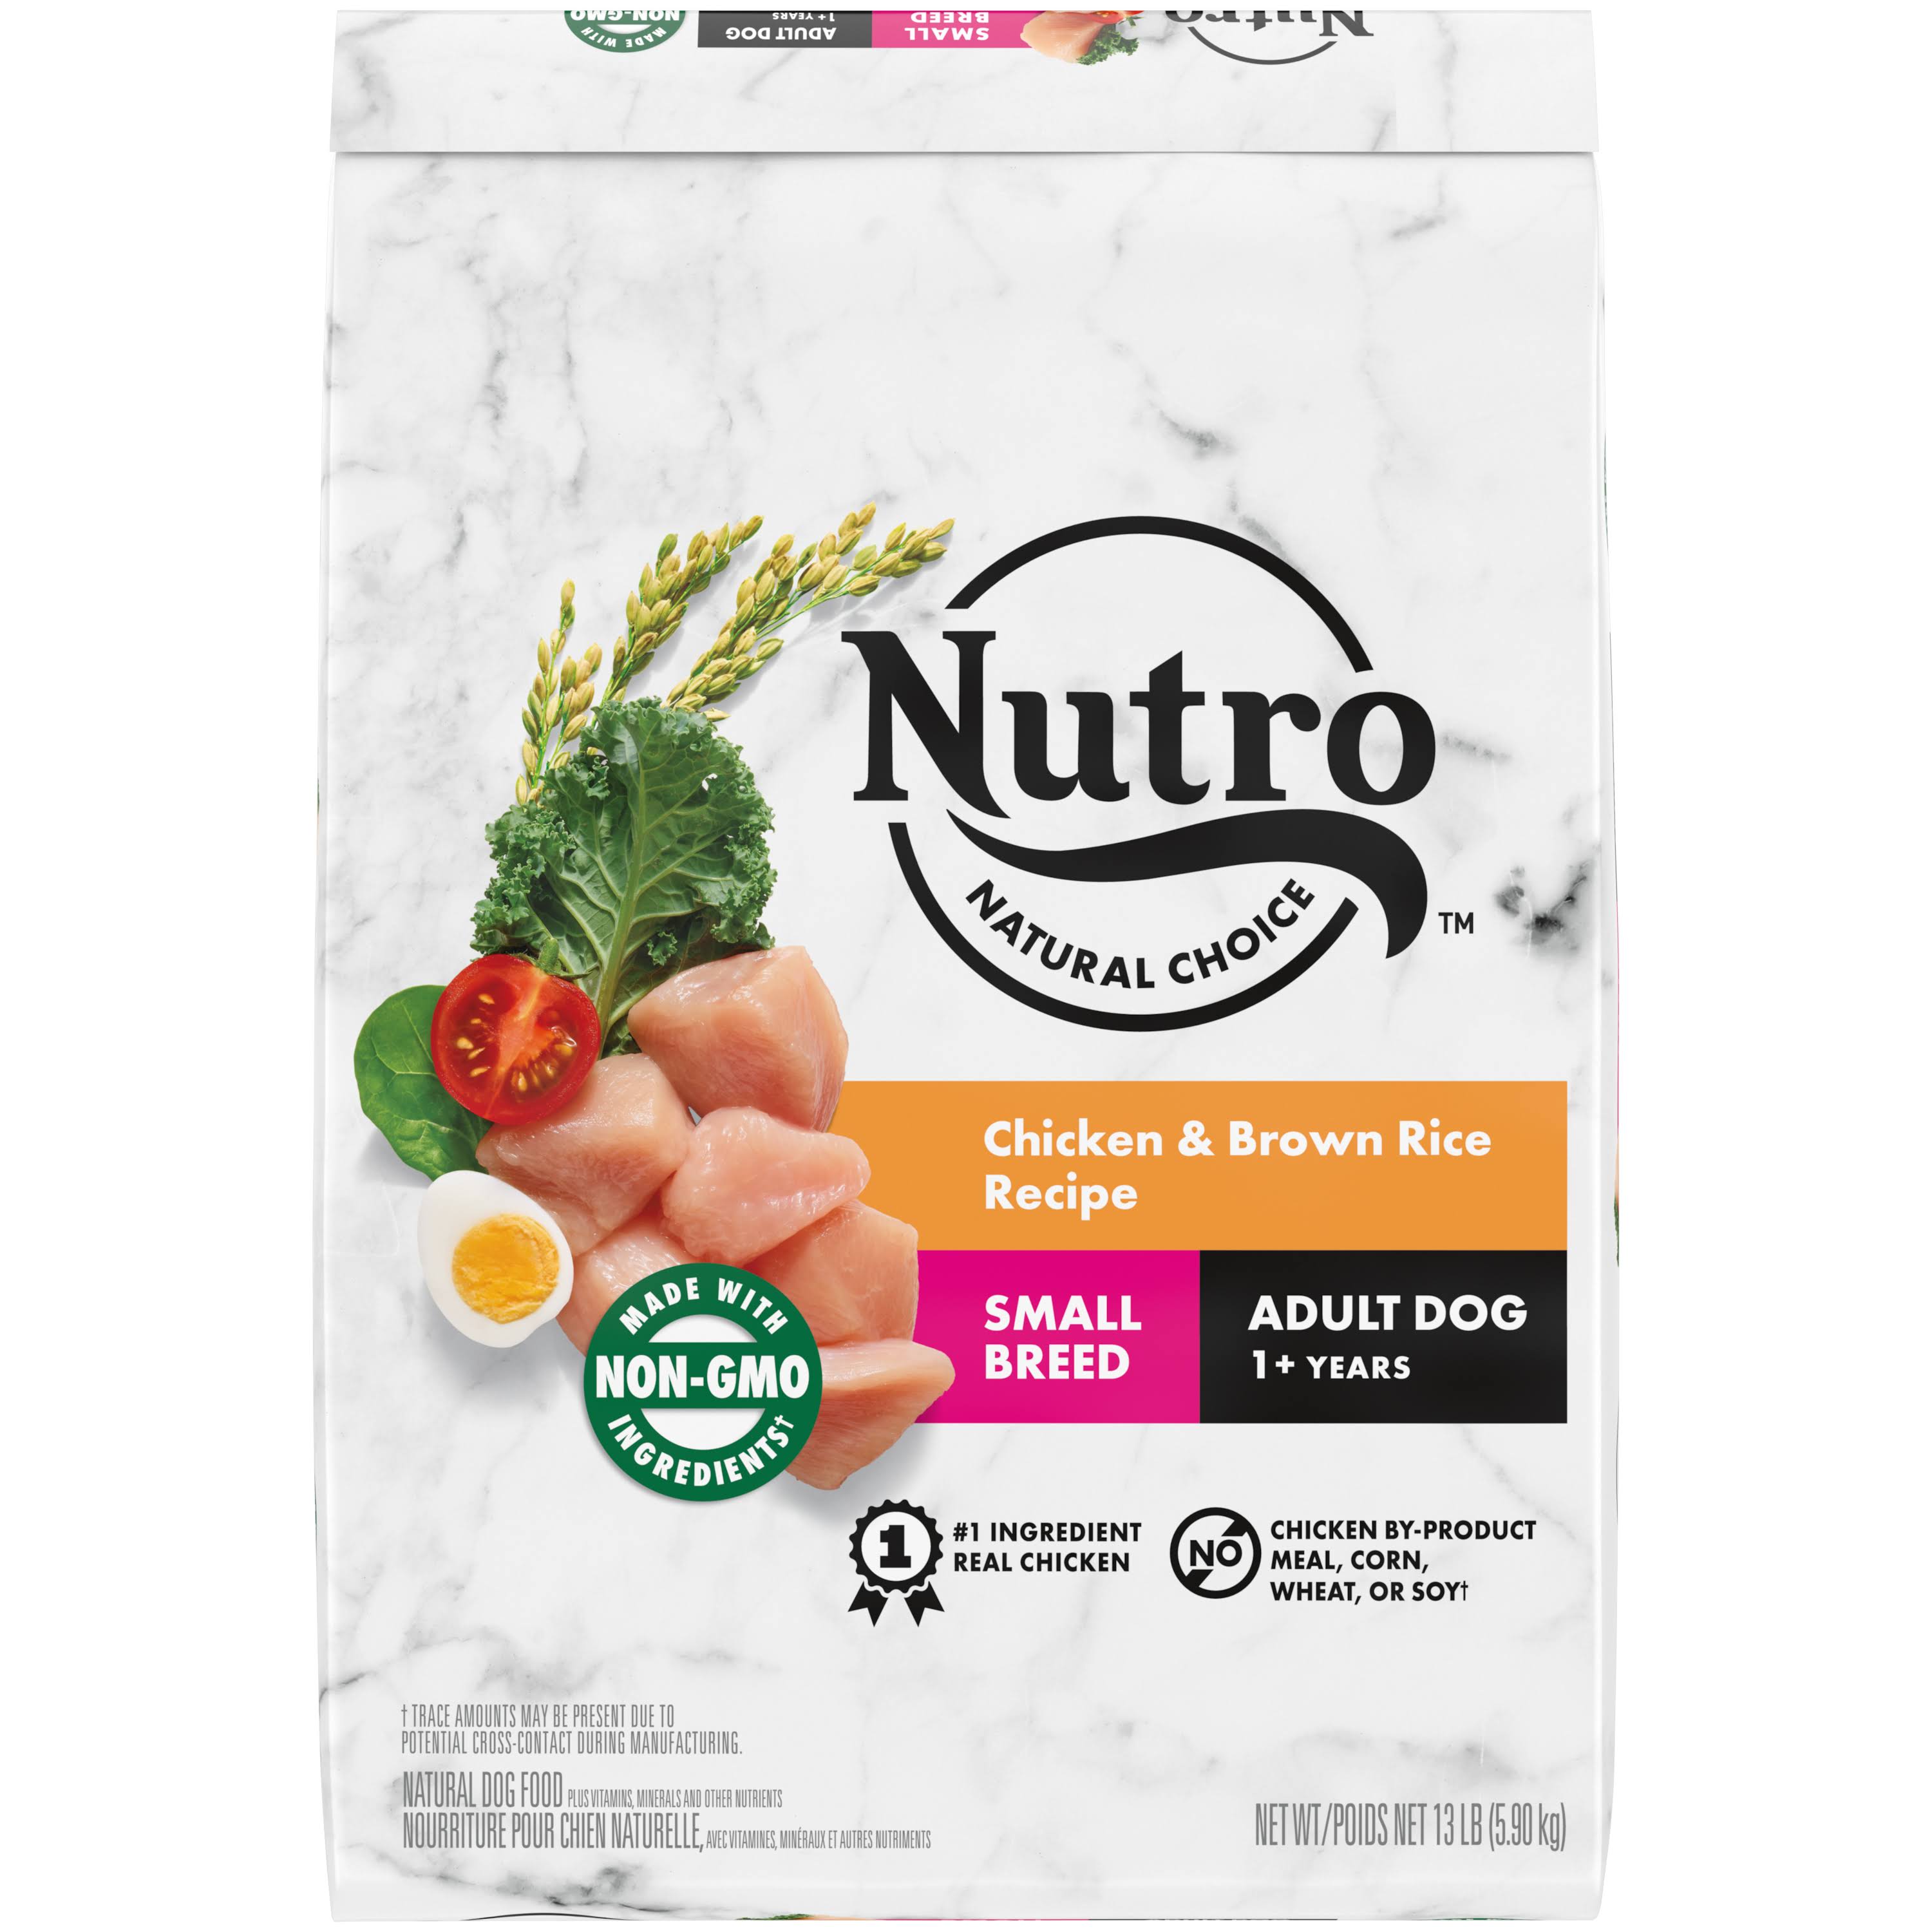 Nutro Natural Choice Dog Food, Natural, Chicken & Brown Rice Recipe, Small Breed, Adult - 13 lb